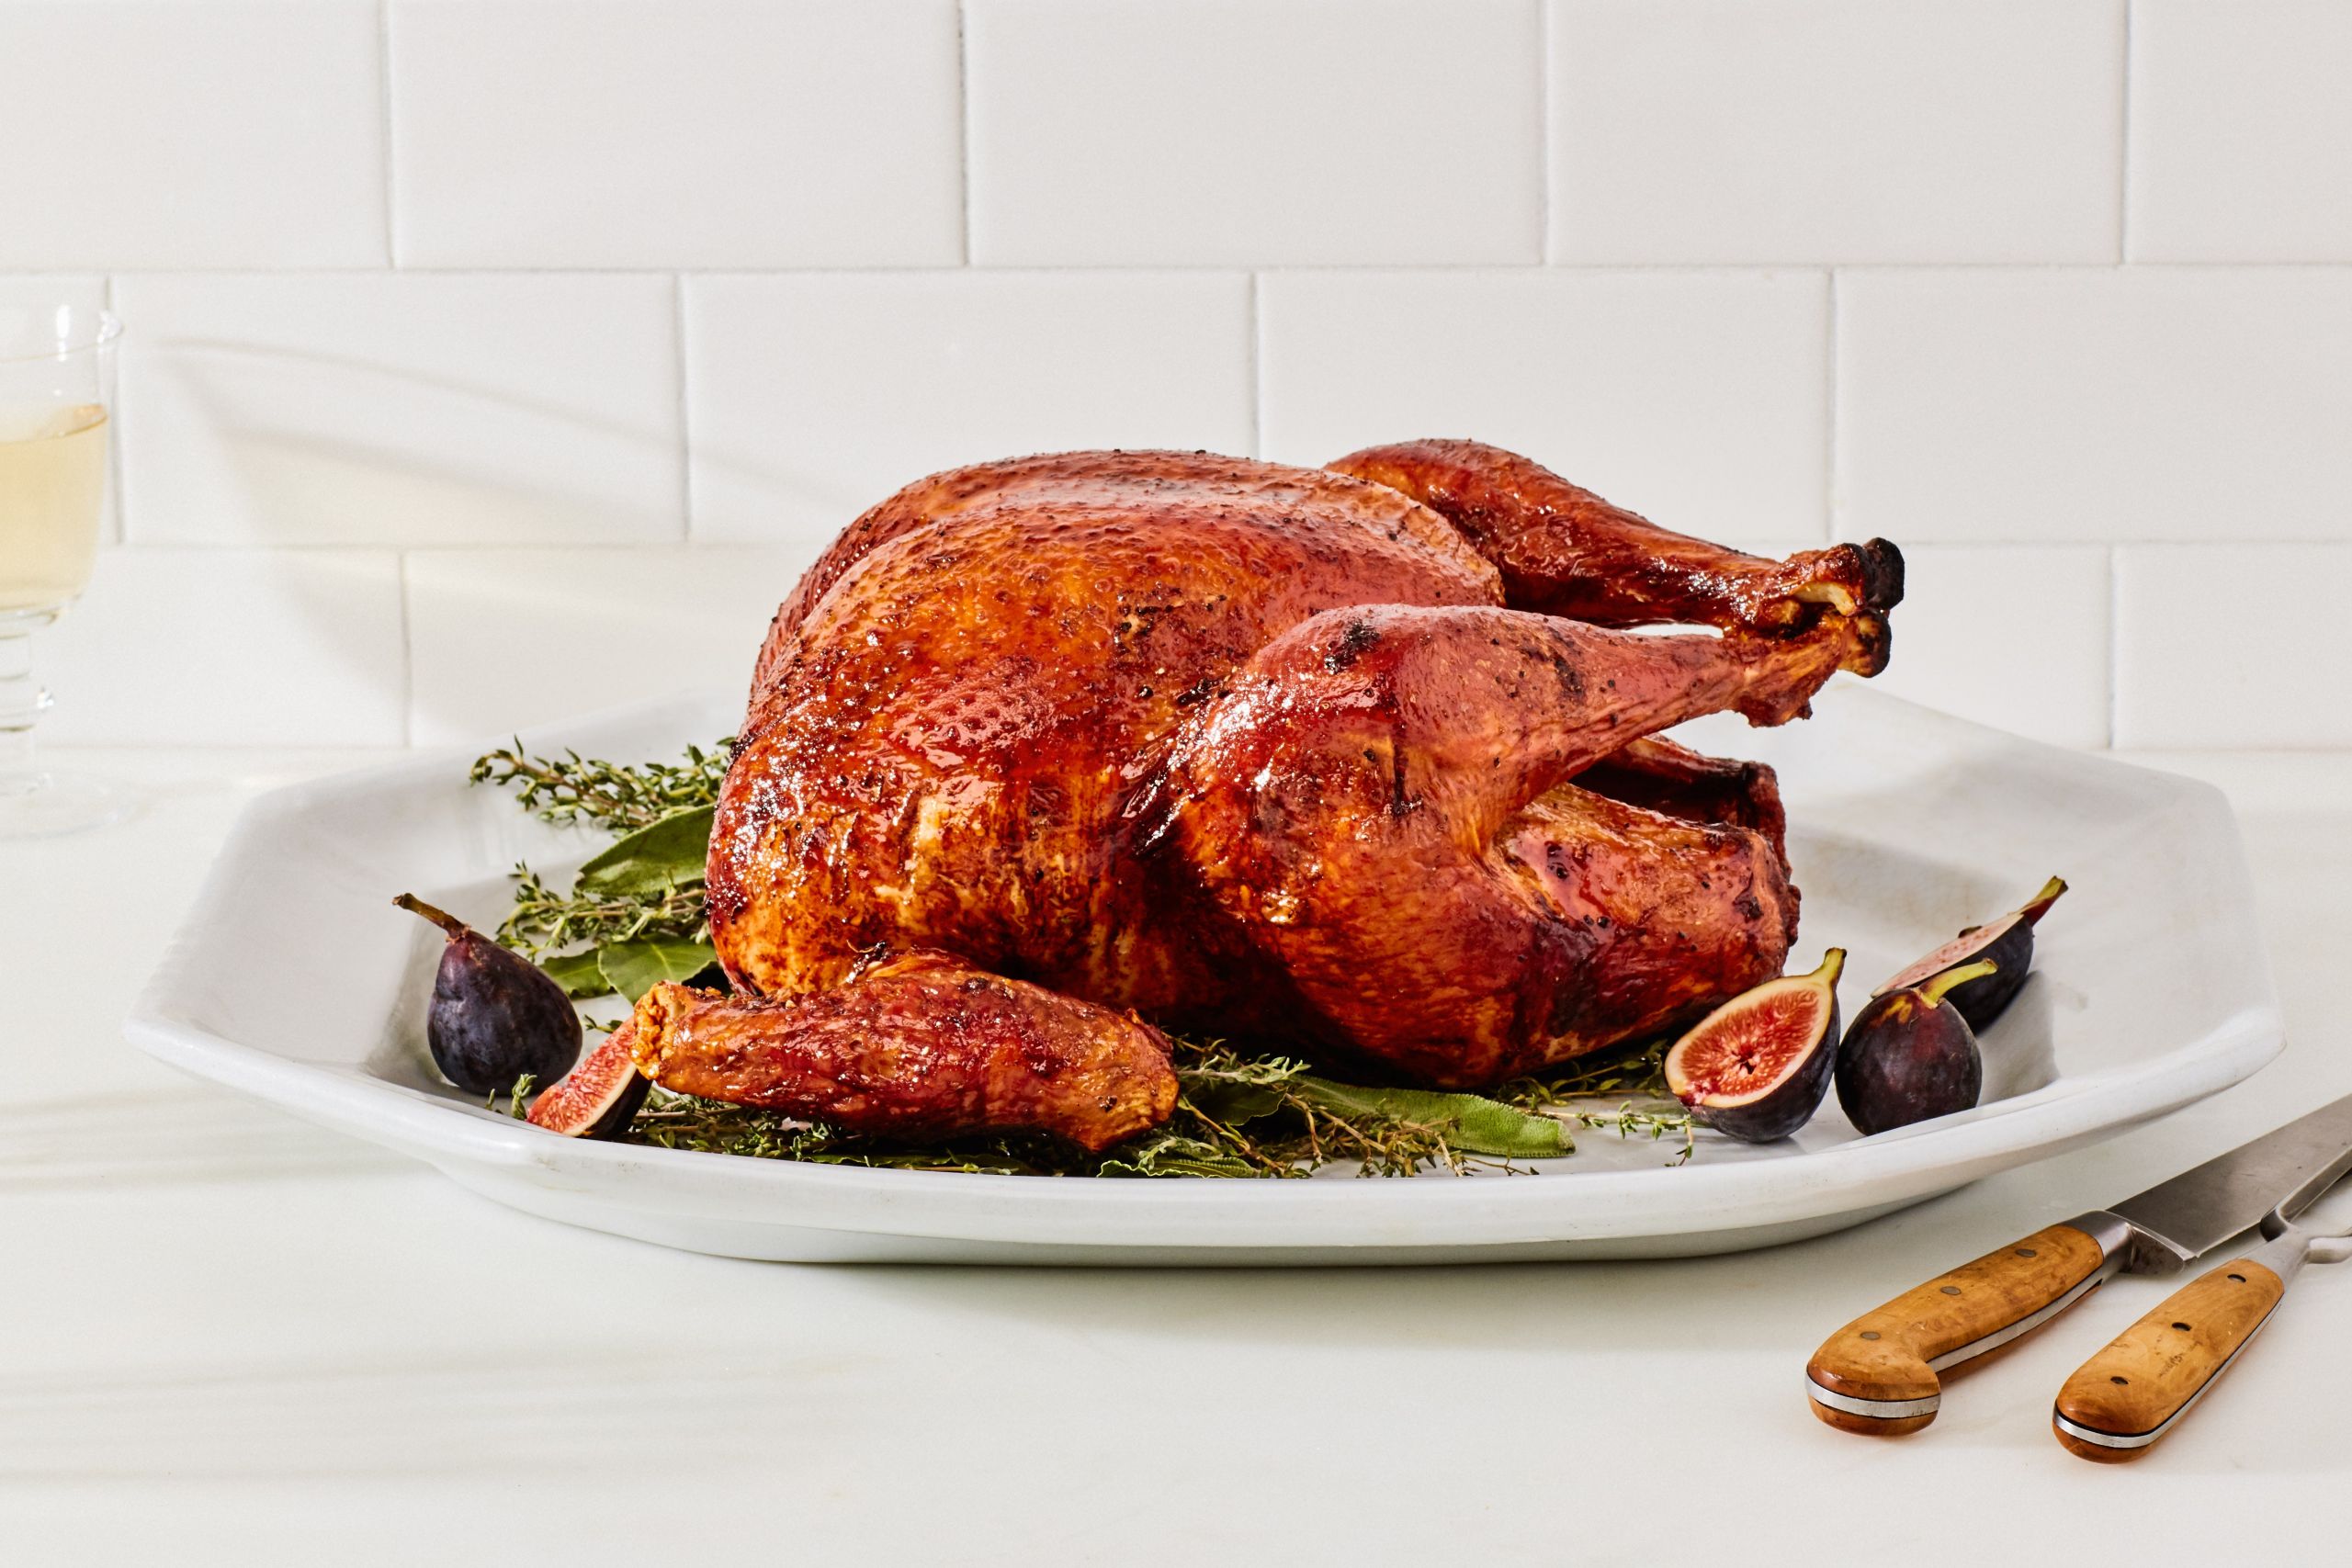 Buy A Cooked Turkey For Thanksgiving
 Our 57 Best Thanksgiving Turkey Recipes